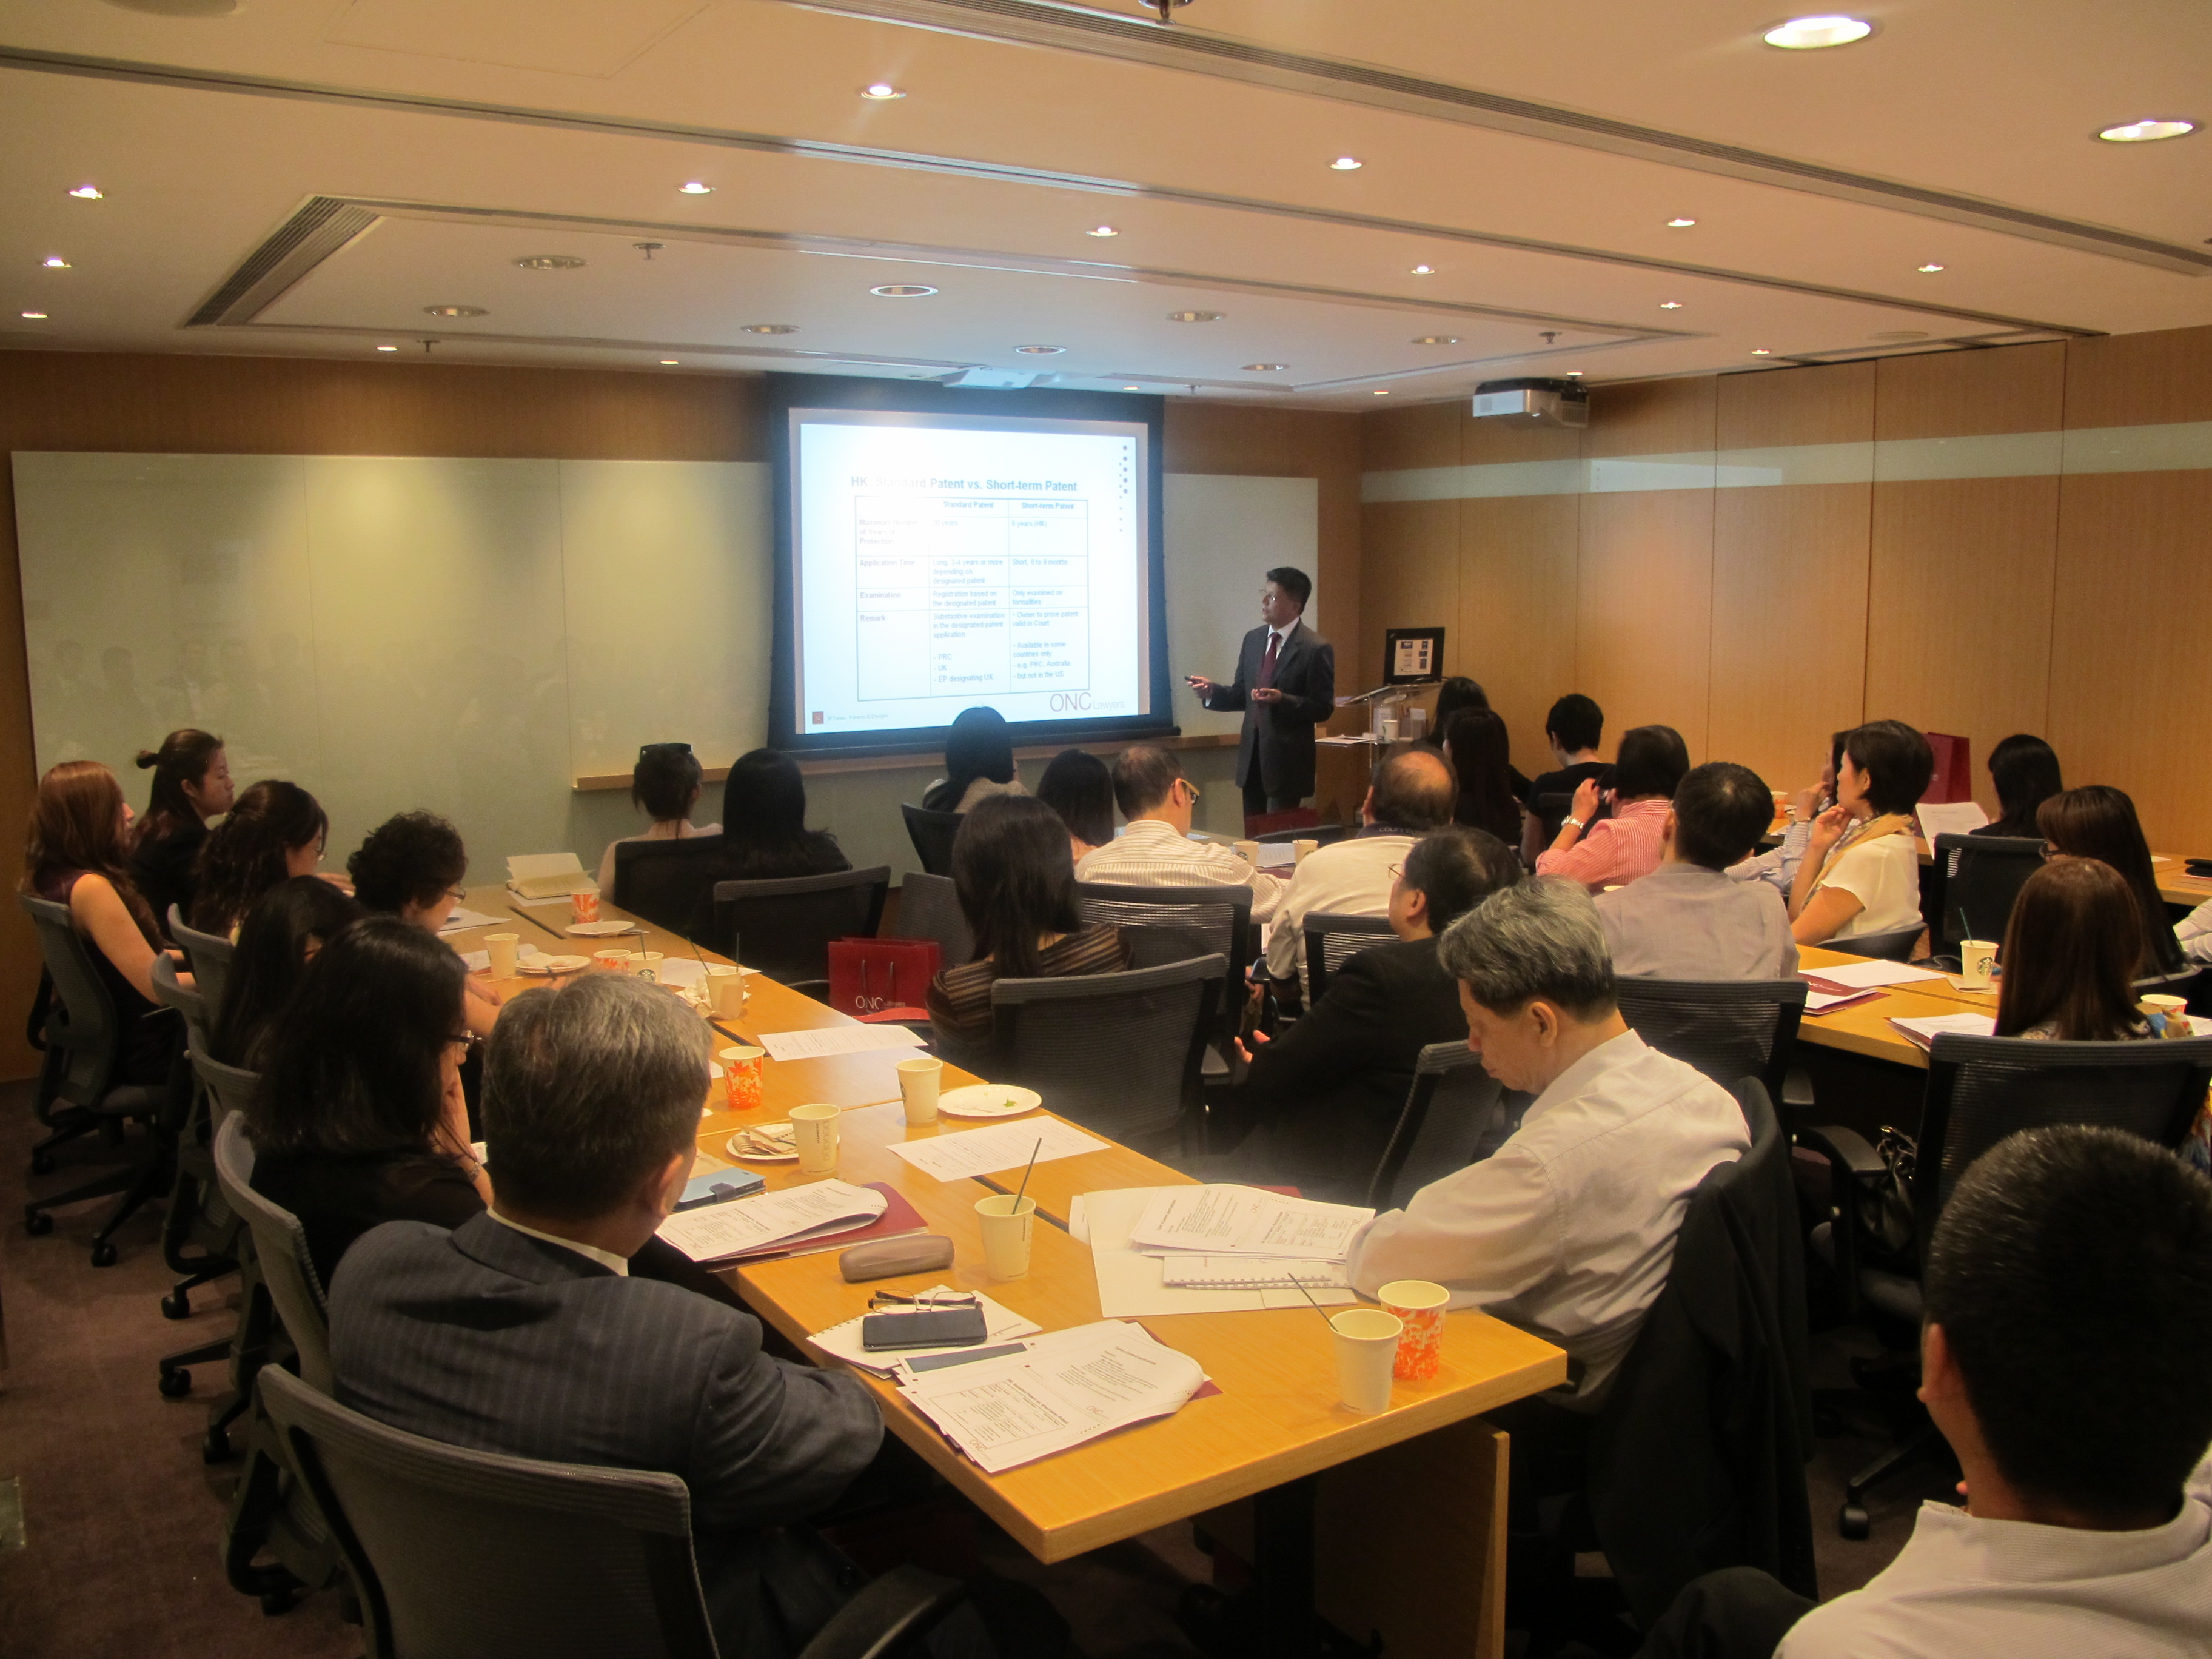 Mr. Ludwig Ng, Mr. Felix Tin and Ms. Iris Mok gave seminars for the ONC Seminar IP Series on trade marks, designs and patents